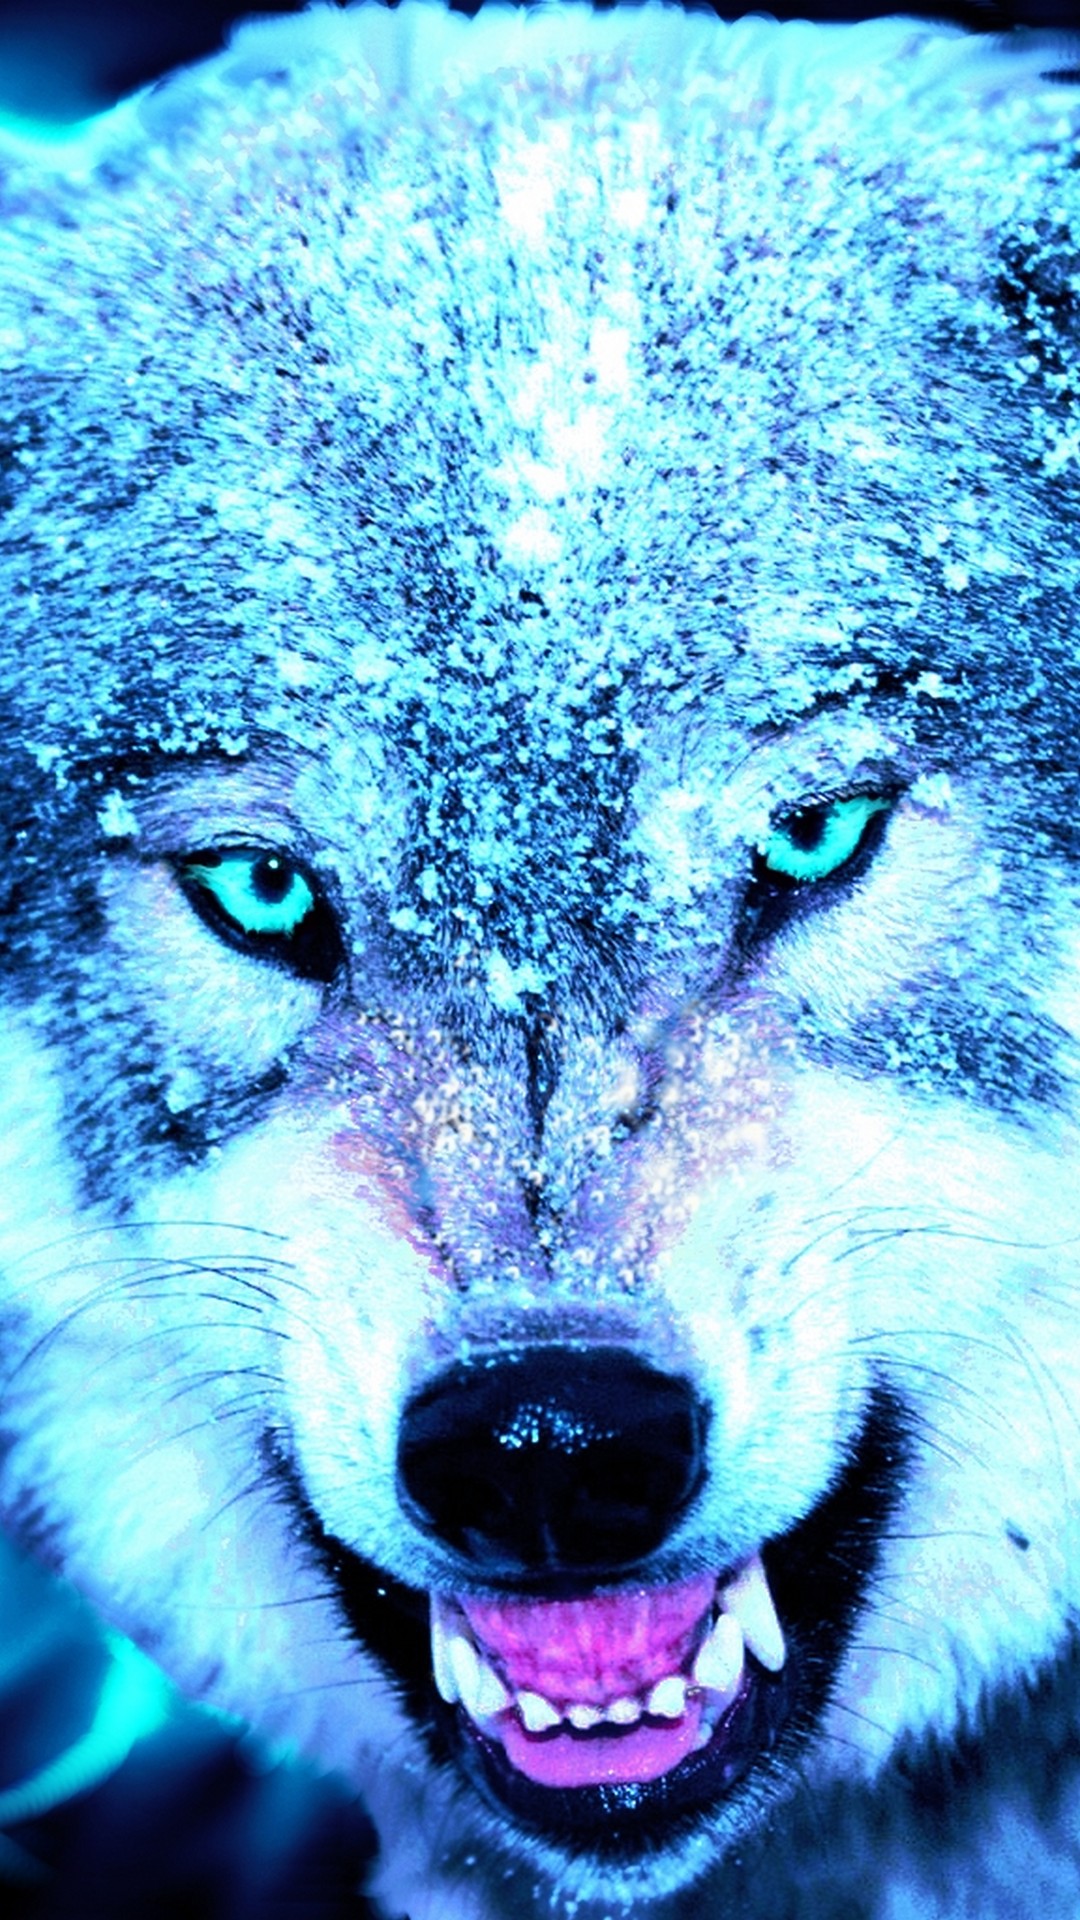 Cool Wolf Wallpaper iPhone With high-resolution 1080X1920 pixel. You can use this wallpaper for your iPhone 5, 6, 7, 8, X, XS, XR backgrounds, Mobile Screensaver, or iPad Lock Screen